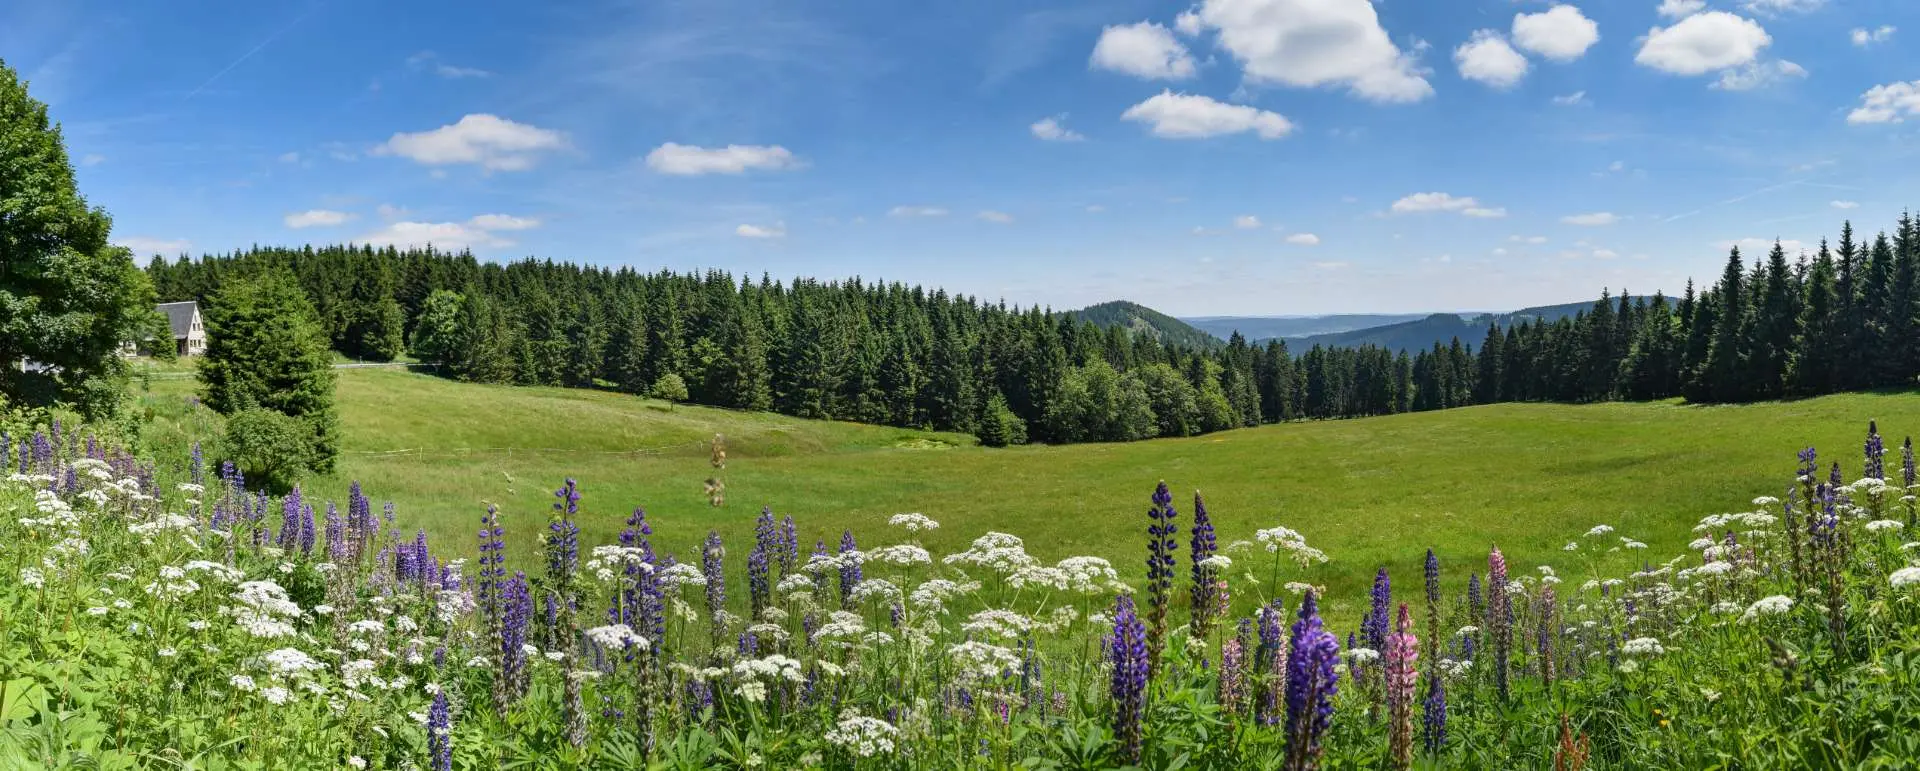 Thuringian Forest - the destination for families